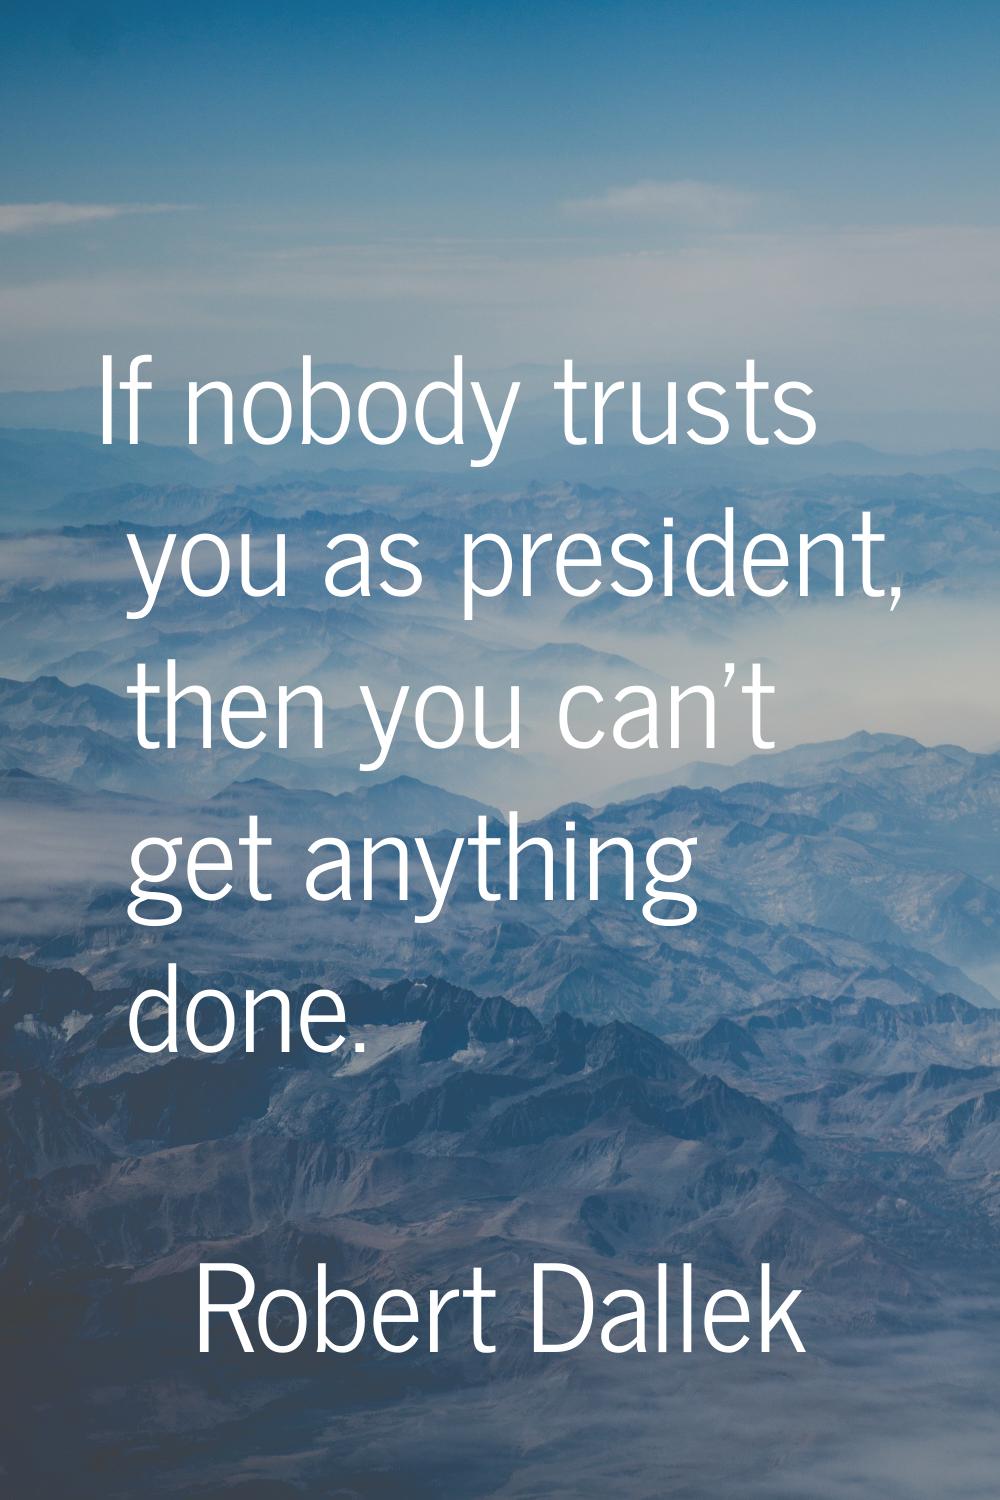 If nobody trusts you as president, then you can't get anything done.